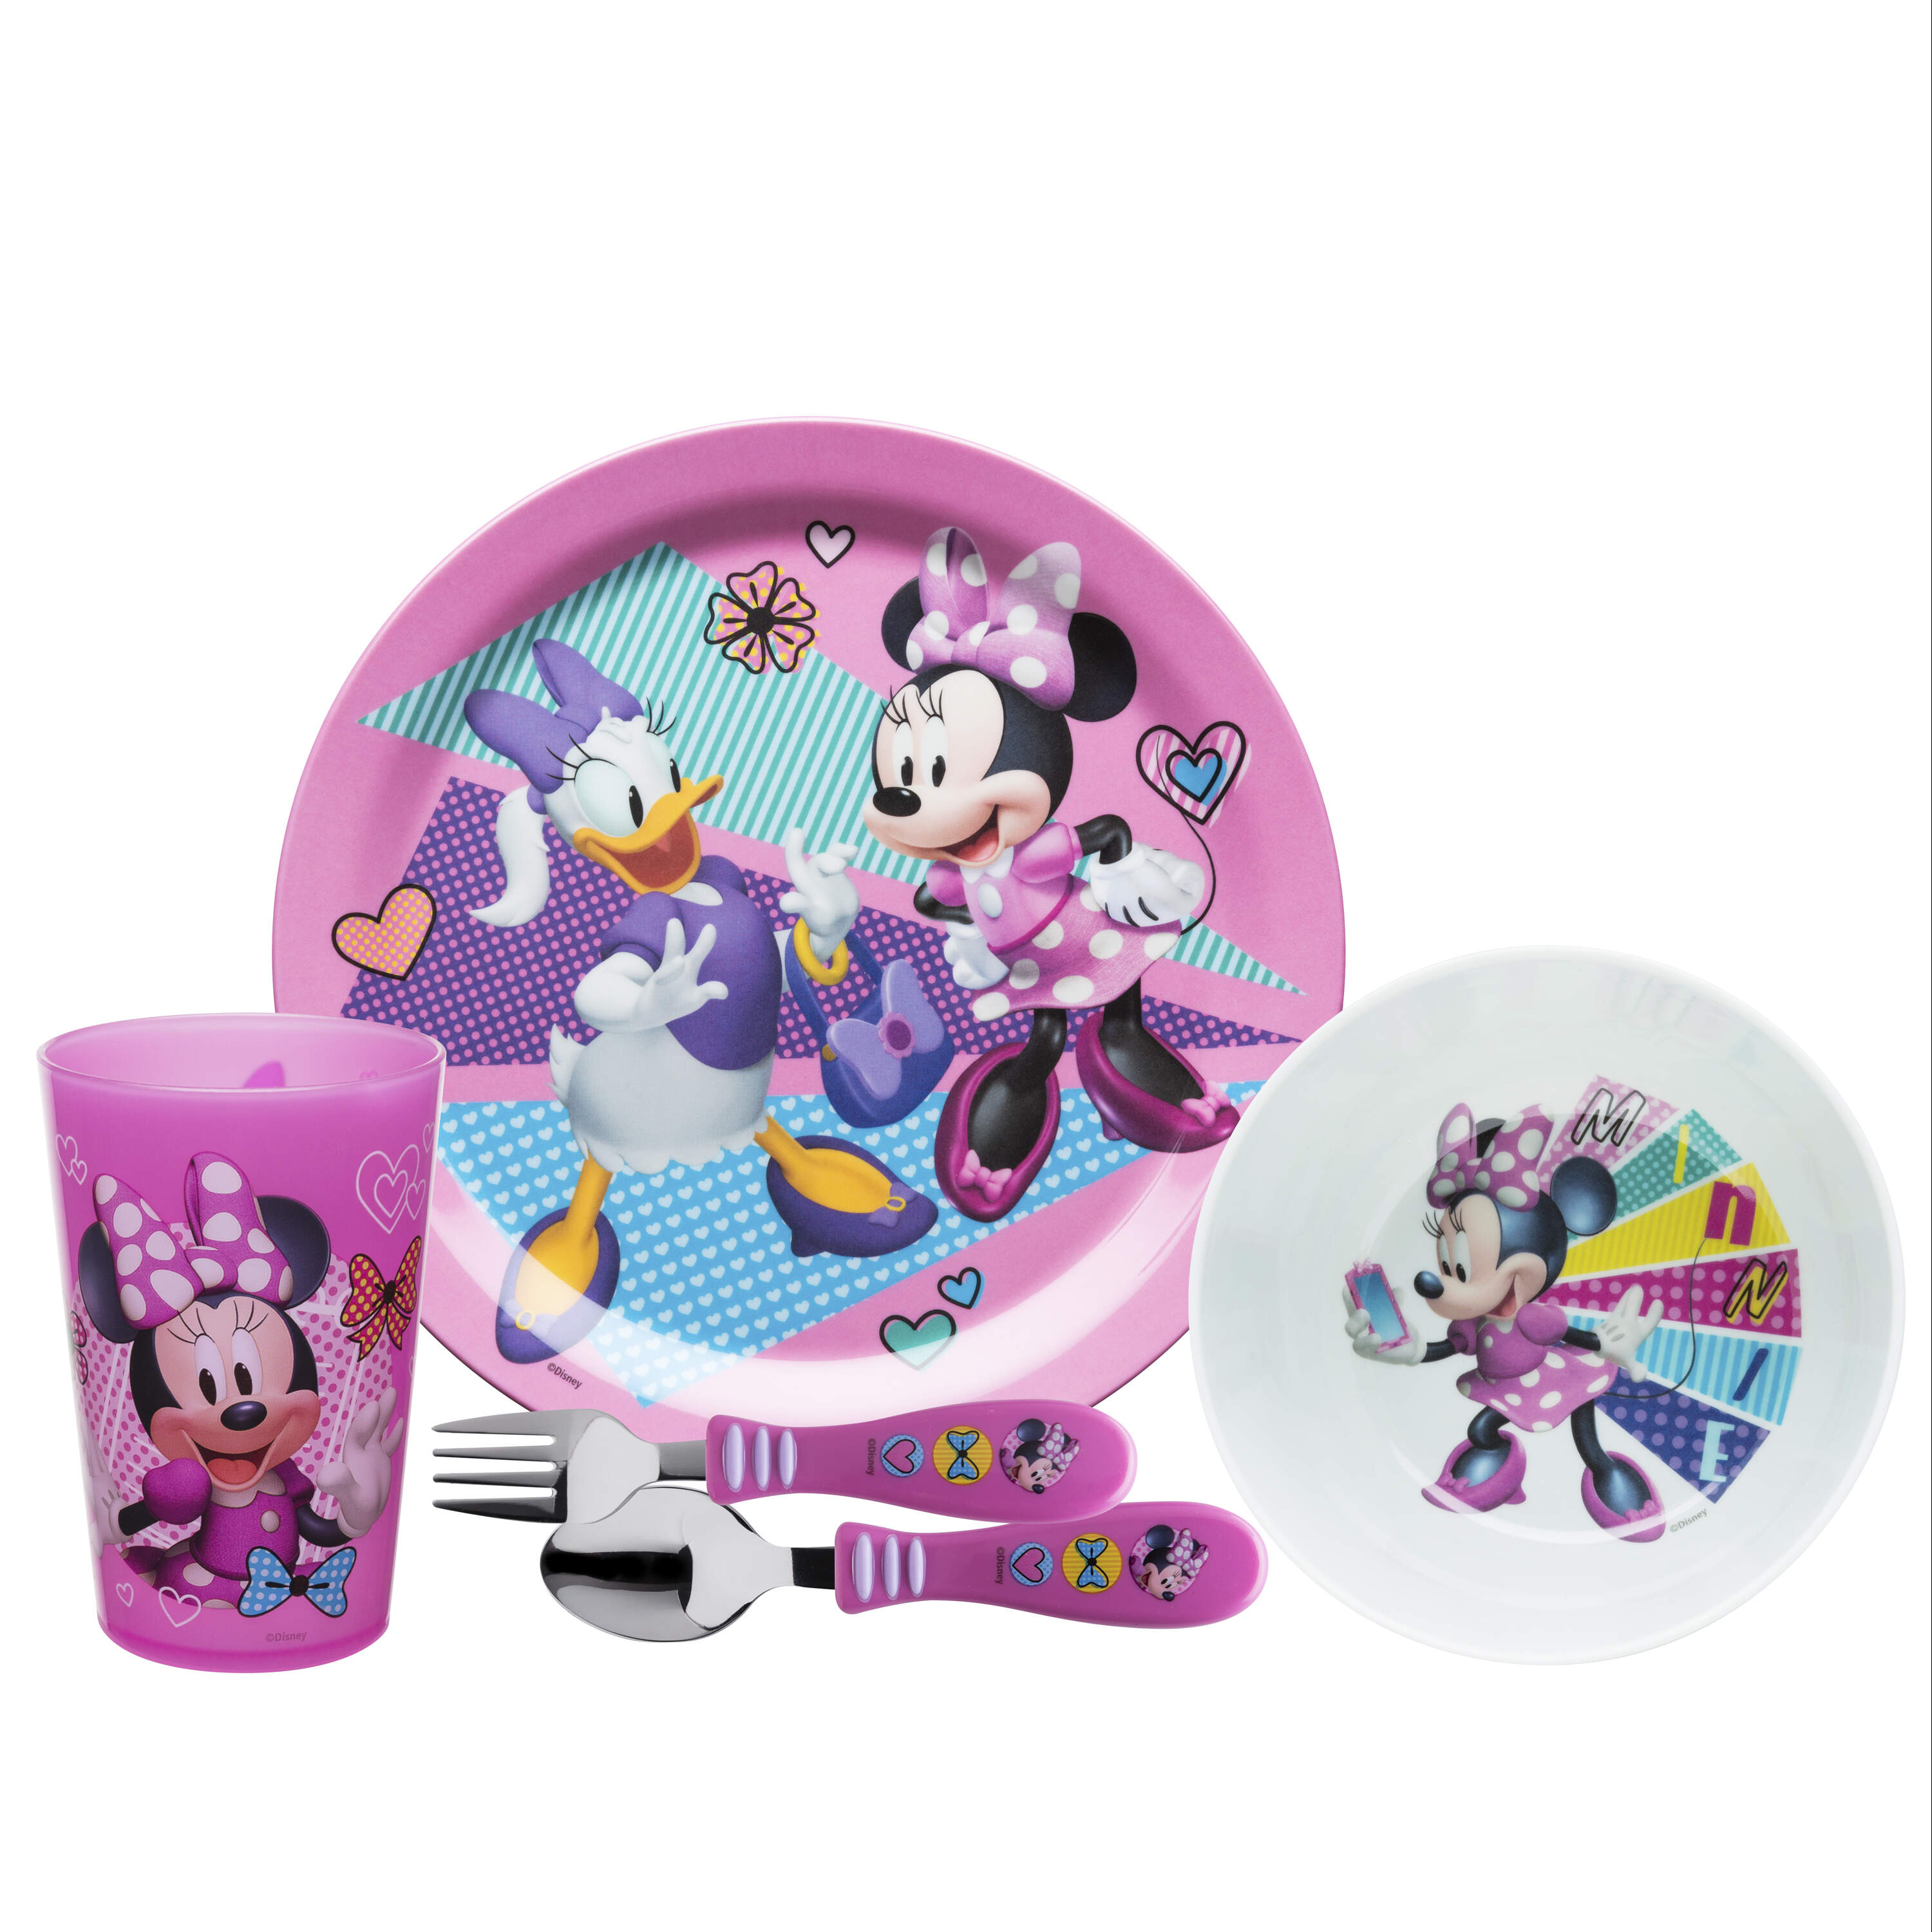 Disney Minnie Mouse Breakfast Meal Set With Bowl & Cup Plate 